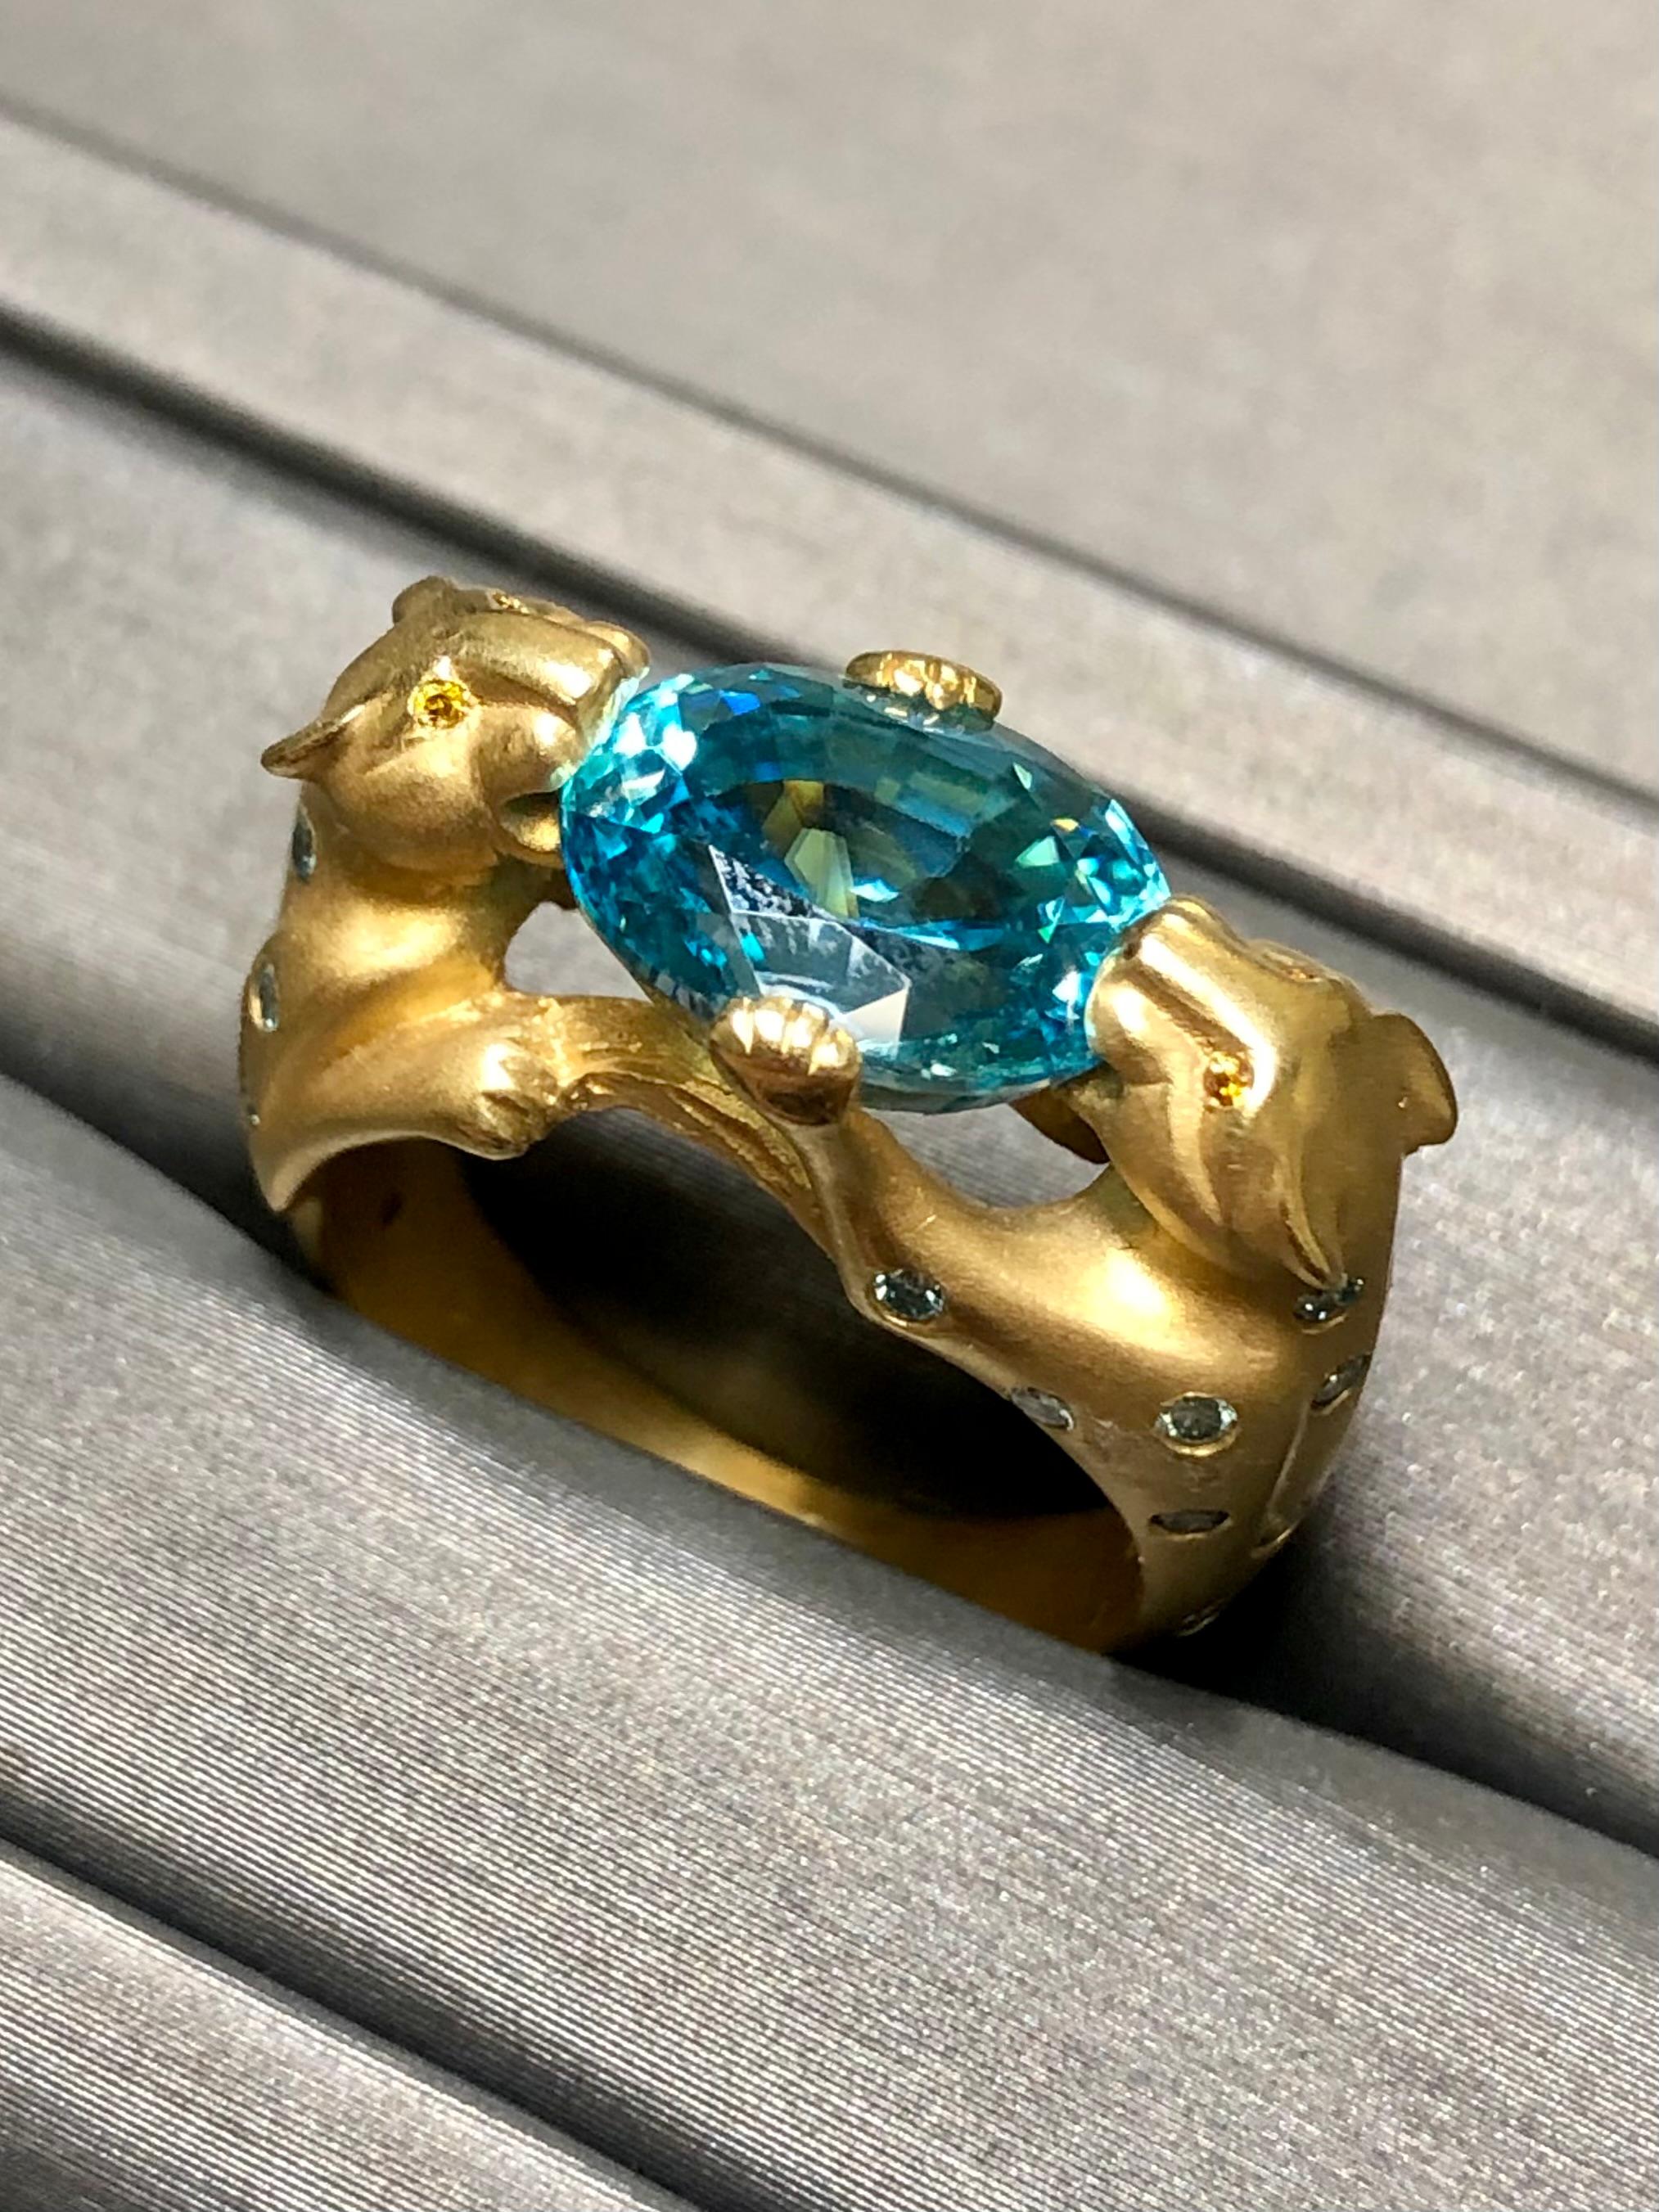 
Undoubtedly one of the highest quality pieces in stock at the moment. This incredible ring has been hand crafted in satin finished 18K yellow gold and held in the mouths of the two panthers is an approximately 7ct deep aqua natural zircon with the